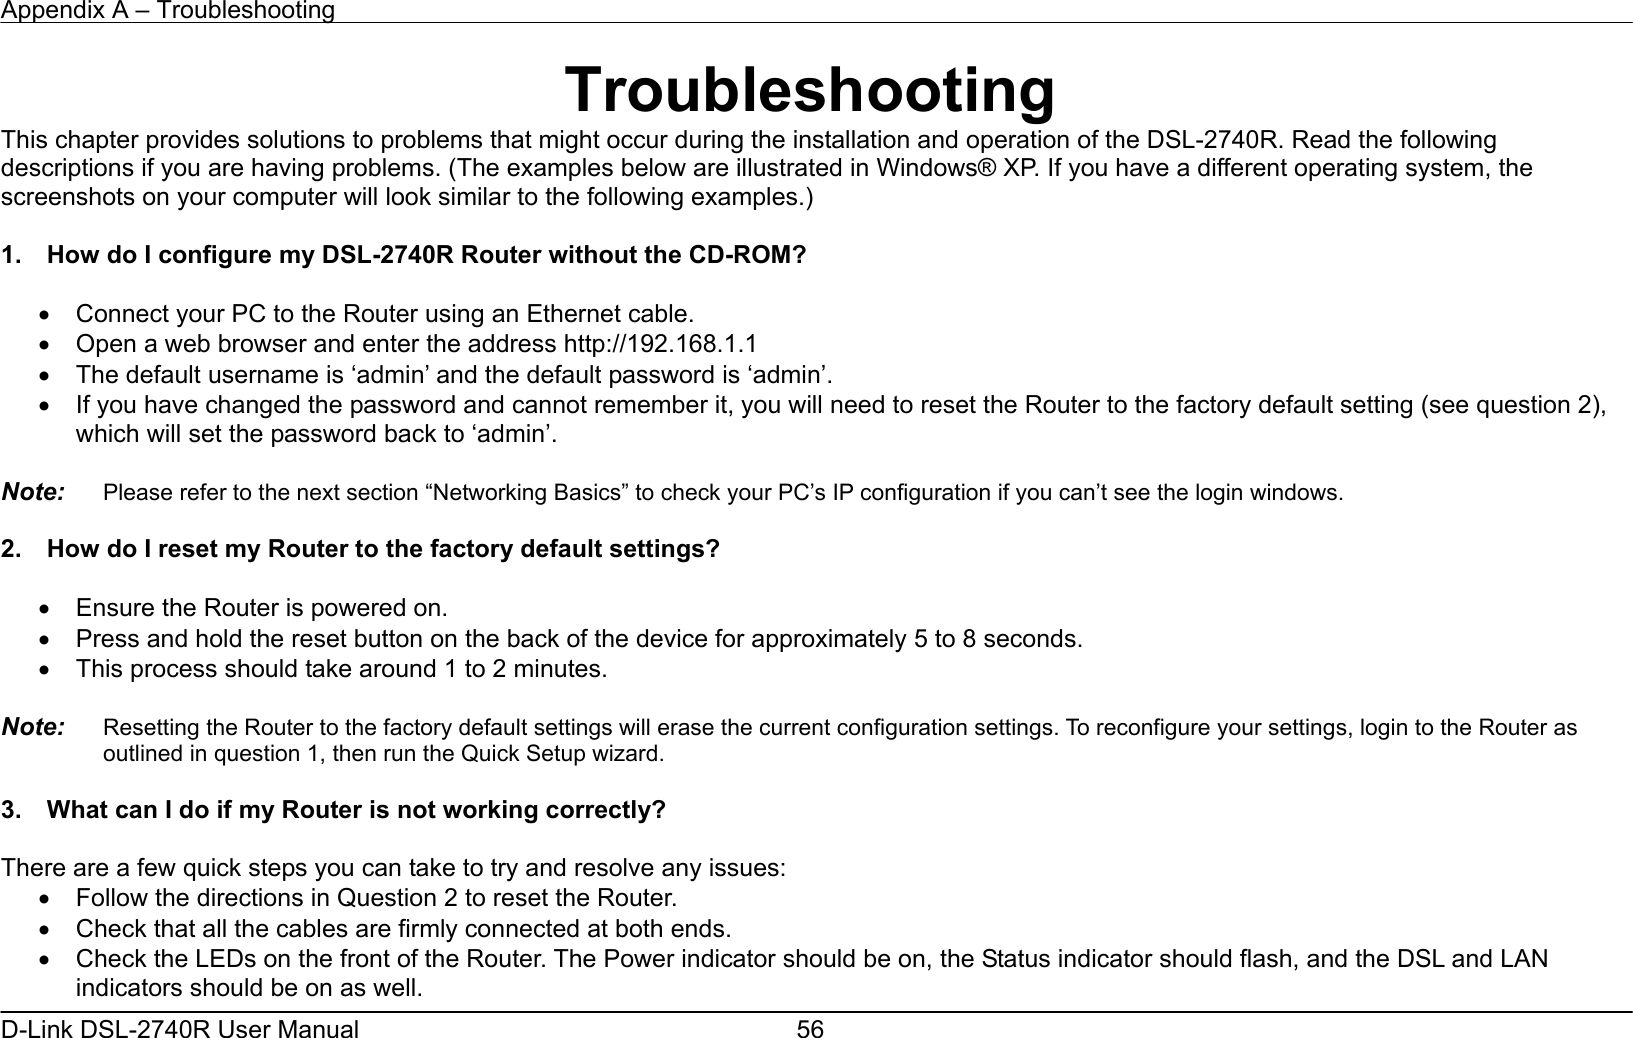 Appendix A – Troubleshooting   D-Link DSL-2740R User Manual  56Troubleshooting This chapter provides solutions to problems that might occur during the installation and operation of the DSL-2740R. Read the following descriptions if you are having problems. (The examples below are illustrated in Windows® XP. If you have a different operating system, the screenshots on your computer will look similar to the following examples.)  1.    How do I configure my DSL-2740R Router without the CD-ROM?  •  Connect your PC to the Router using an Ethernet cable. •  Open a web browser and enter the address http://192.168.1.1 •  The default username is ‘admin’ and the default password is ‘admin’. •  If you have changed the password and cannot remember it, you will need to reset the Router to the factory default setting (see question 2), which will set the password back to ‘admin’.  Note:   Please refer to the next section “Networking Basics” to check your PC’s IP configuration if you can’t see the login windows.  2.    How do I reset my Router to the factory default settings?  •  Ensure the Router is powered on. •  Press and hold the reset button on the back of the device for approximately 5 to 8 seconds. •  This process should take around 1 to 2 minutes.    Note:   Resetting the Router to the factory default settings will erase the current configuration settings. To reconfigure your settings, login to the Router as outlined in question 1, then run the Quick Setup wizard.  3.    What can I do if my Router is not working correctly?  There are a few quick steps you can take to try and resolve any issues: •  Follow the directions in Question 2 to reset the Router. •  Check that all the cables are firmly connected at both ends. •  Check the LEDs on the front of the Router. The Power indicator should be on, the Status indicator should flash, and the DSL and LAN indicators should be on as well. 